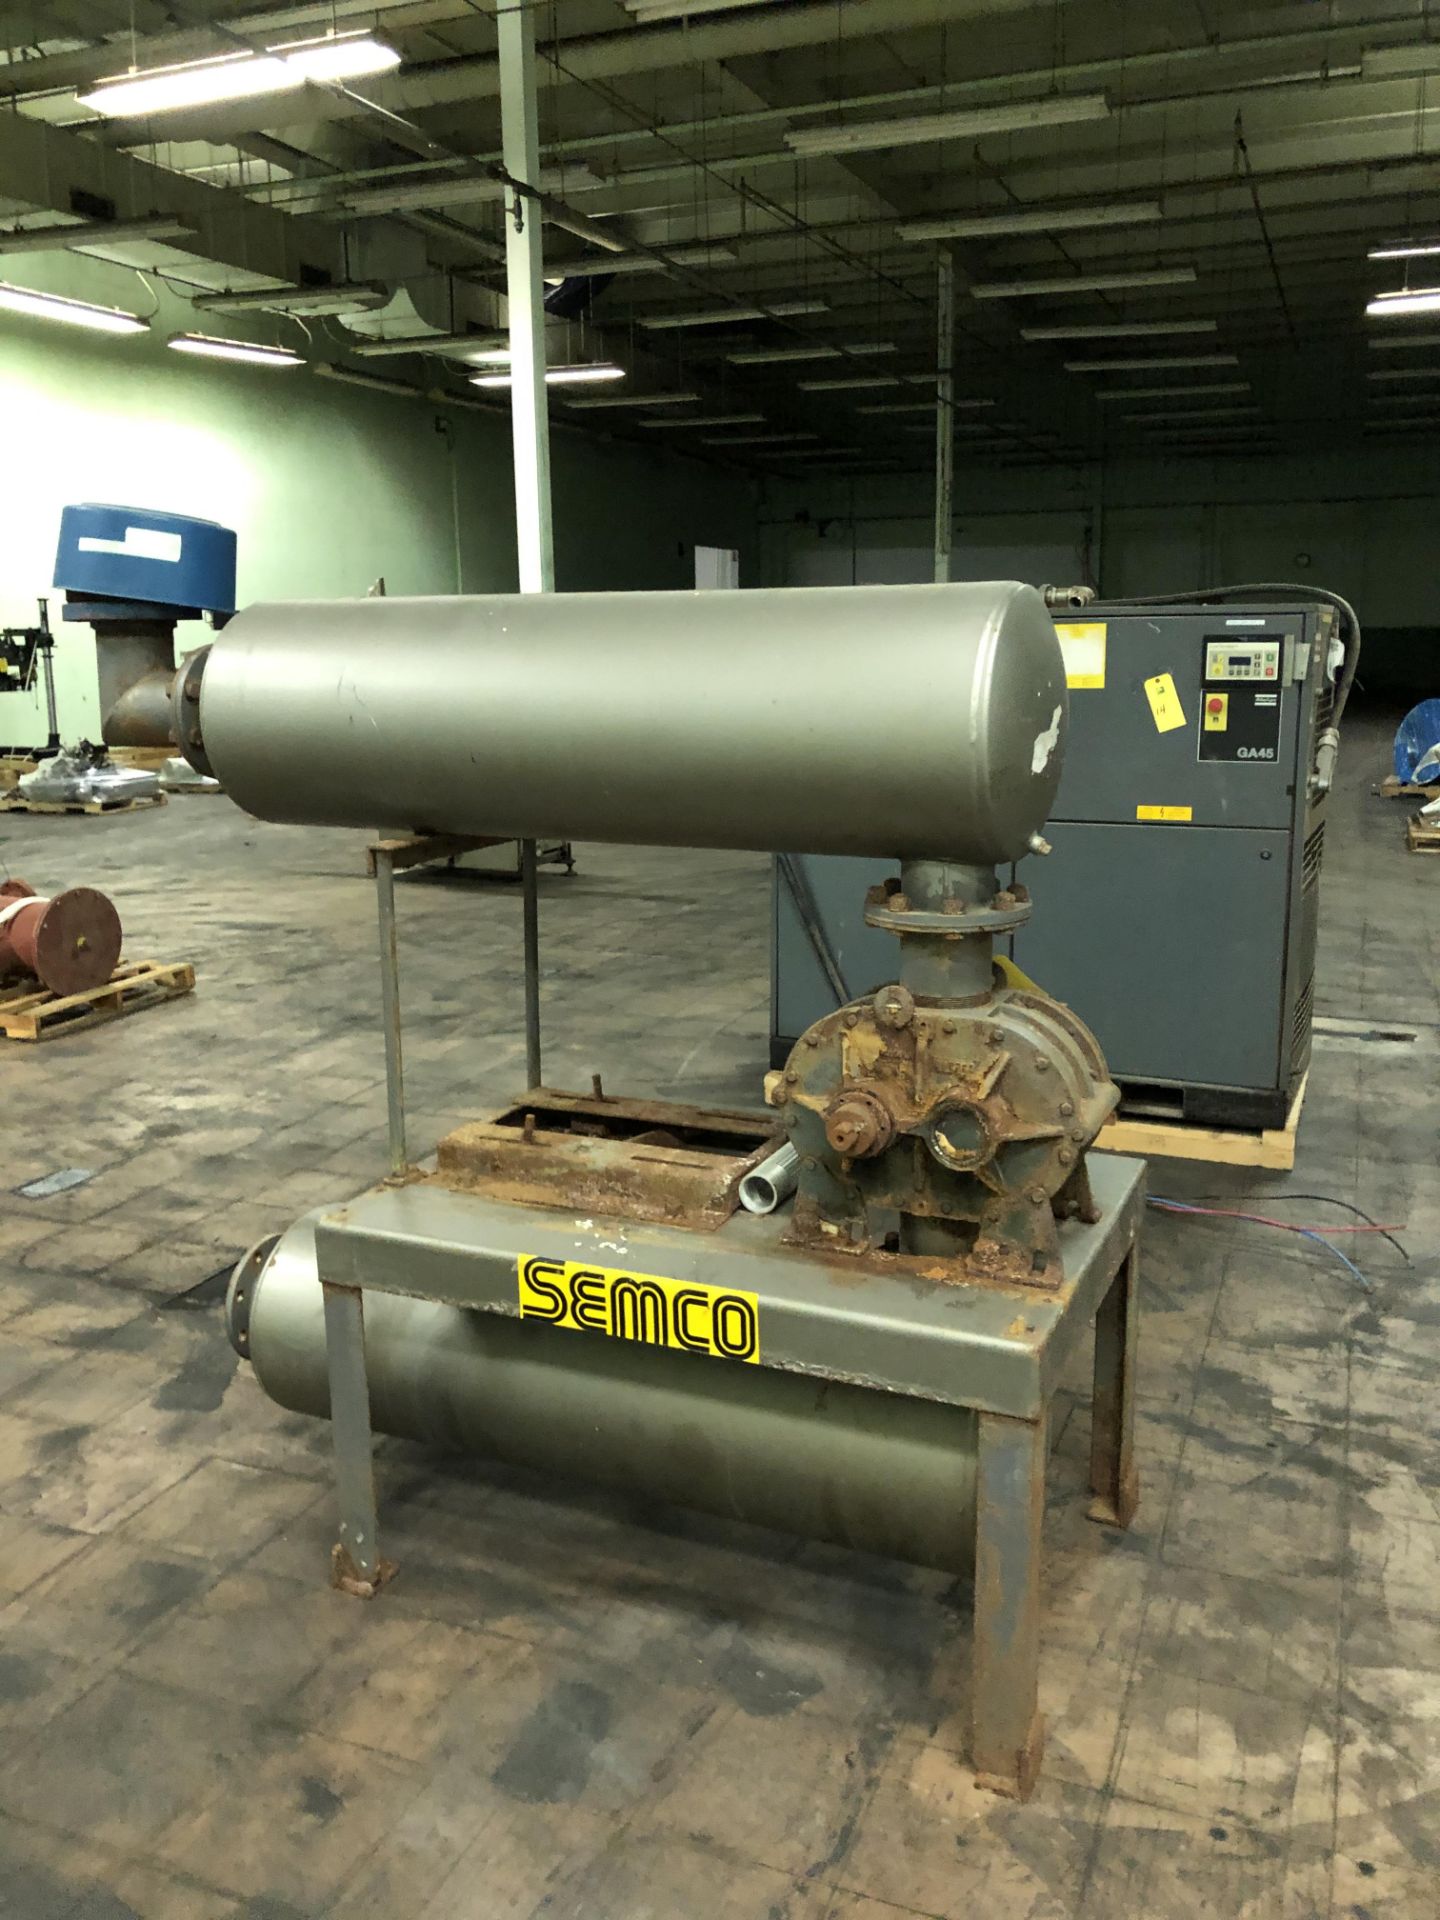 Tuthill Corp. Model #6008-21L2 Vacuum Pump, Tanks, Stand, Note - No Motor, RIGGING FEE - $150 - Image 2 of 2